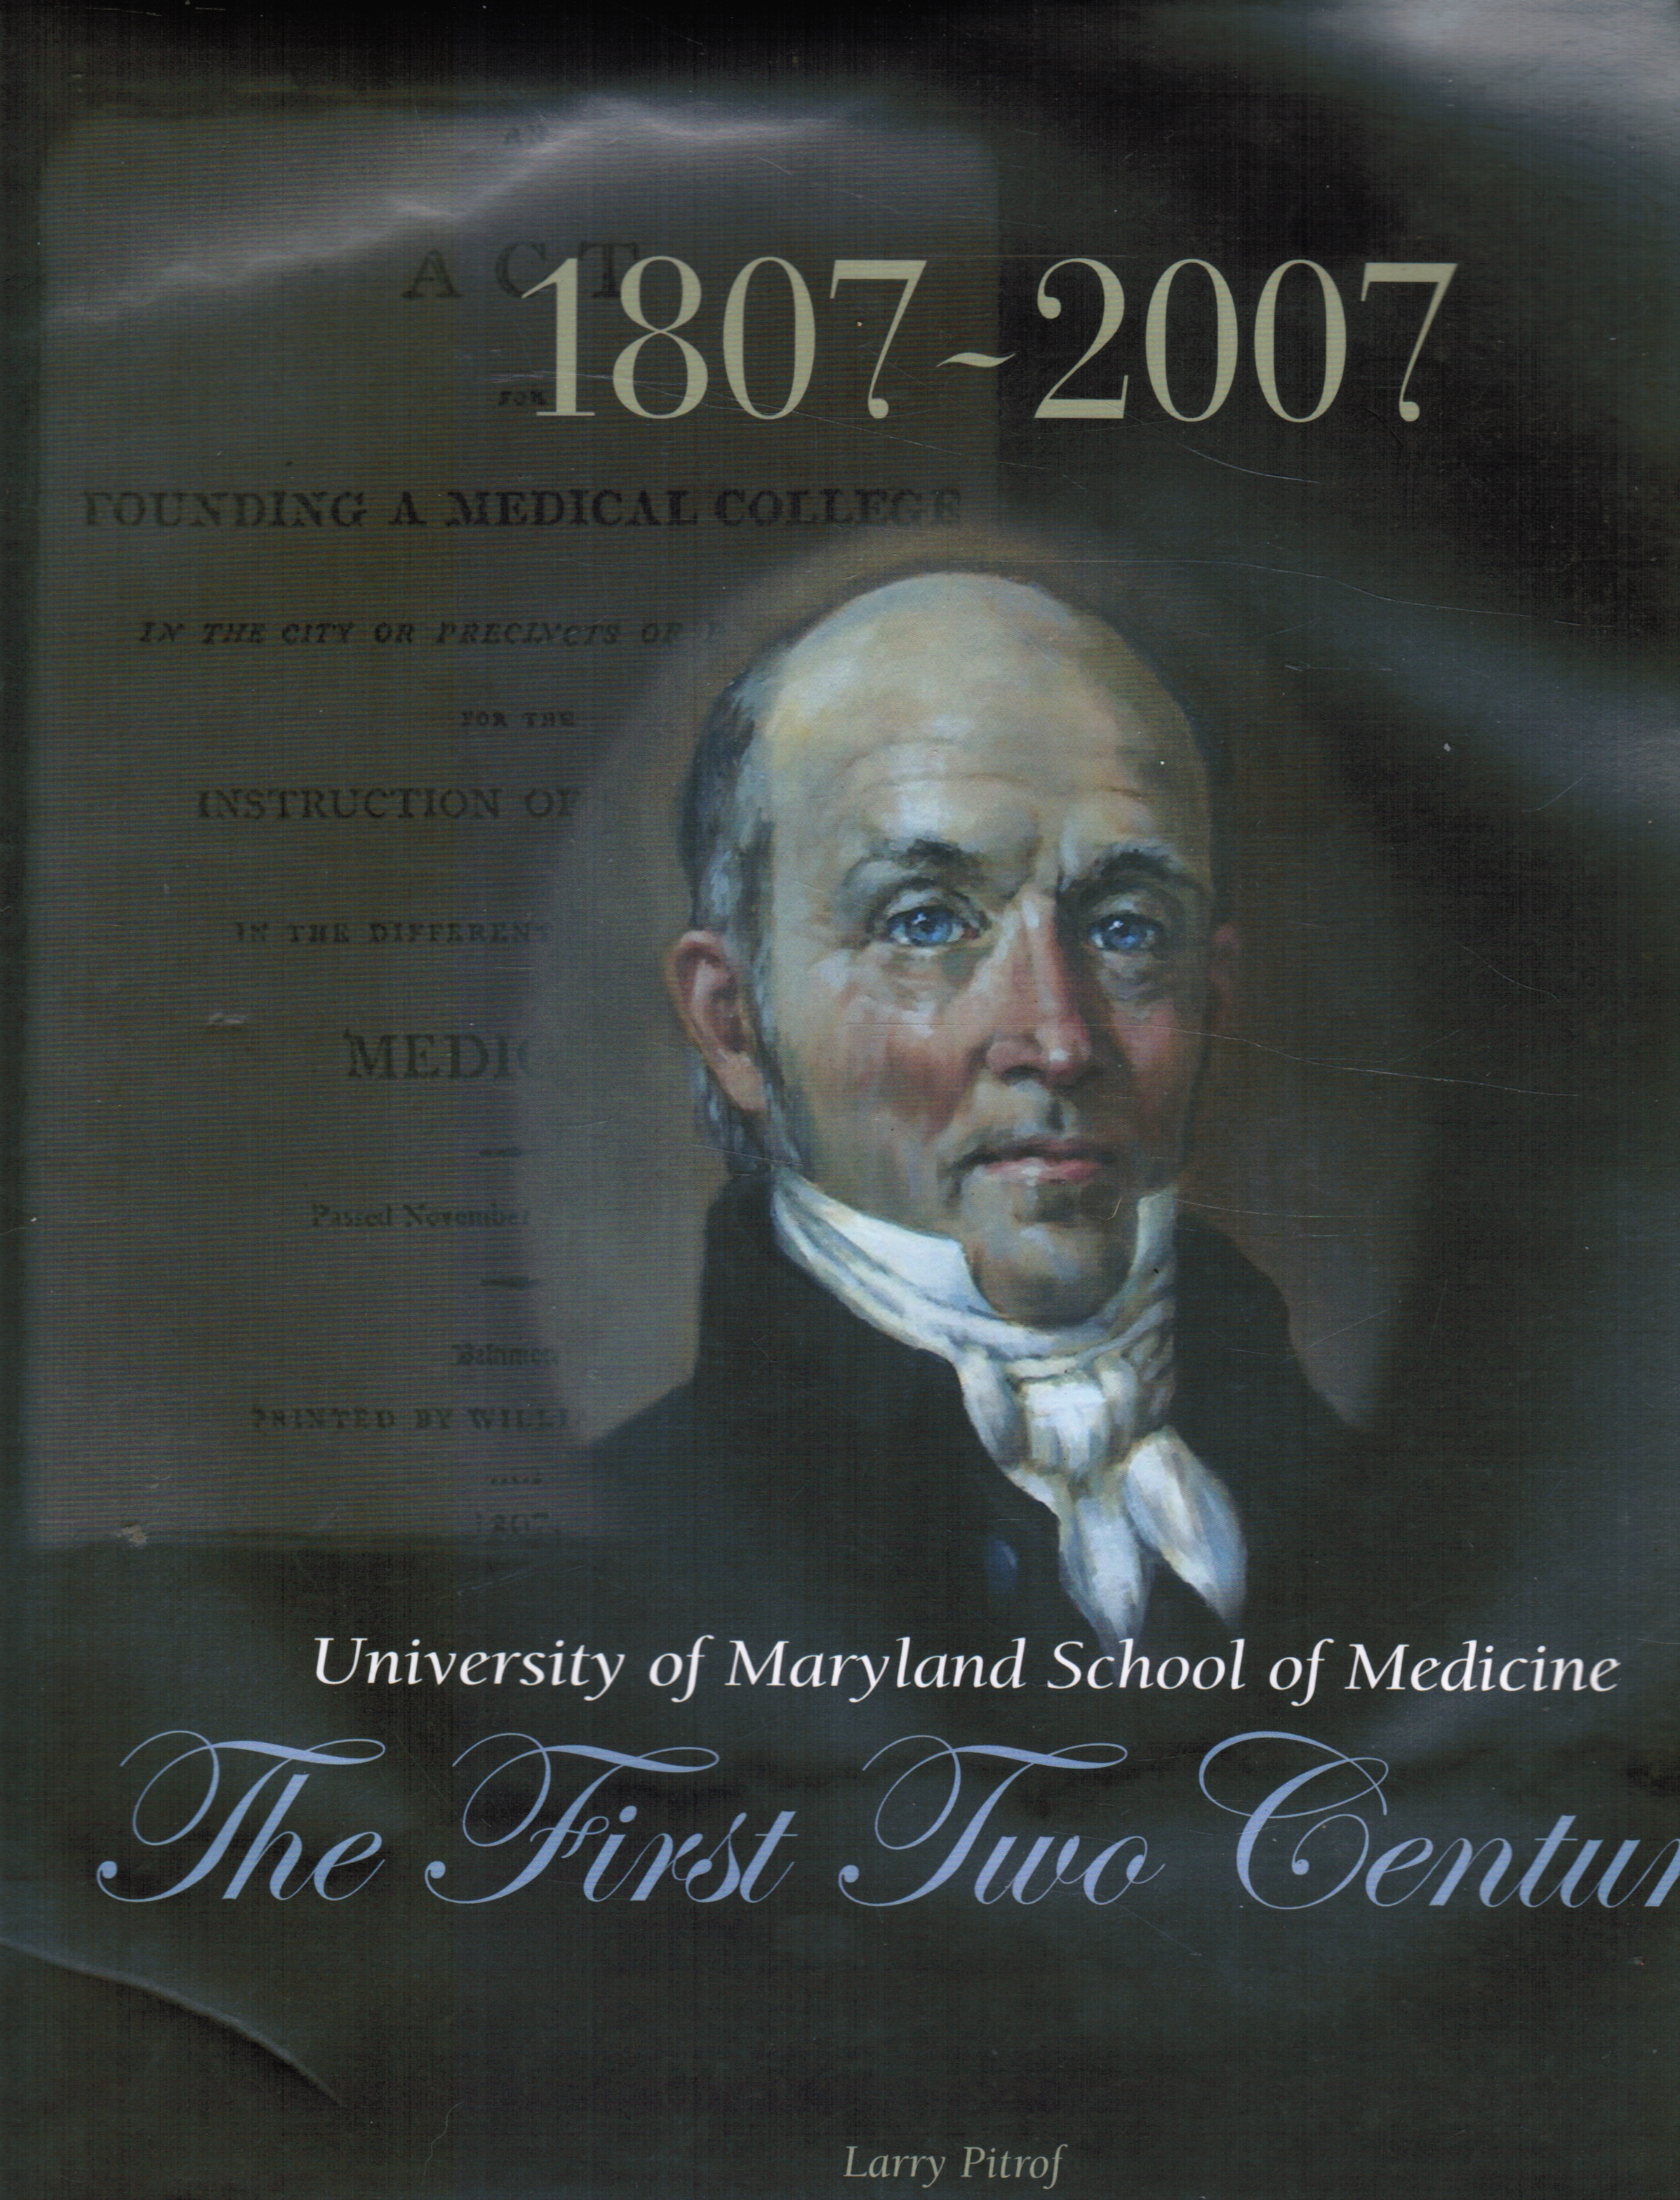 PITROF, LARRY; KRIEGER, M.D. MORTON M. - University of Maryland School of Medicine: The First Two Centuries 1807-2007 (Signed)